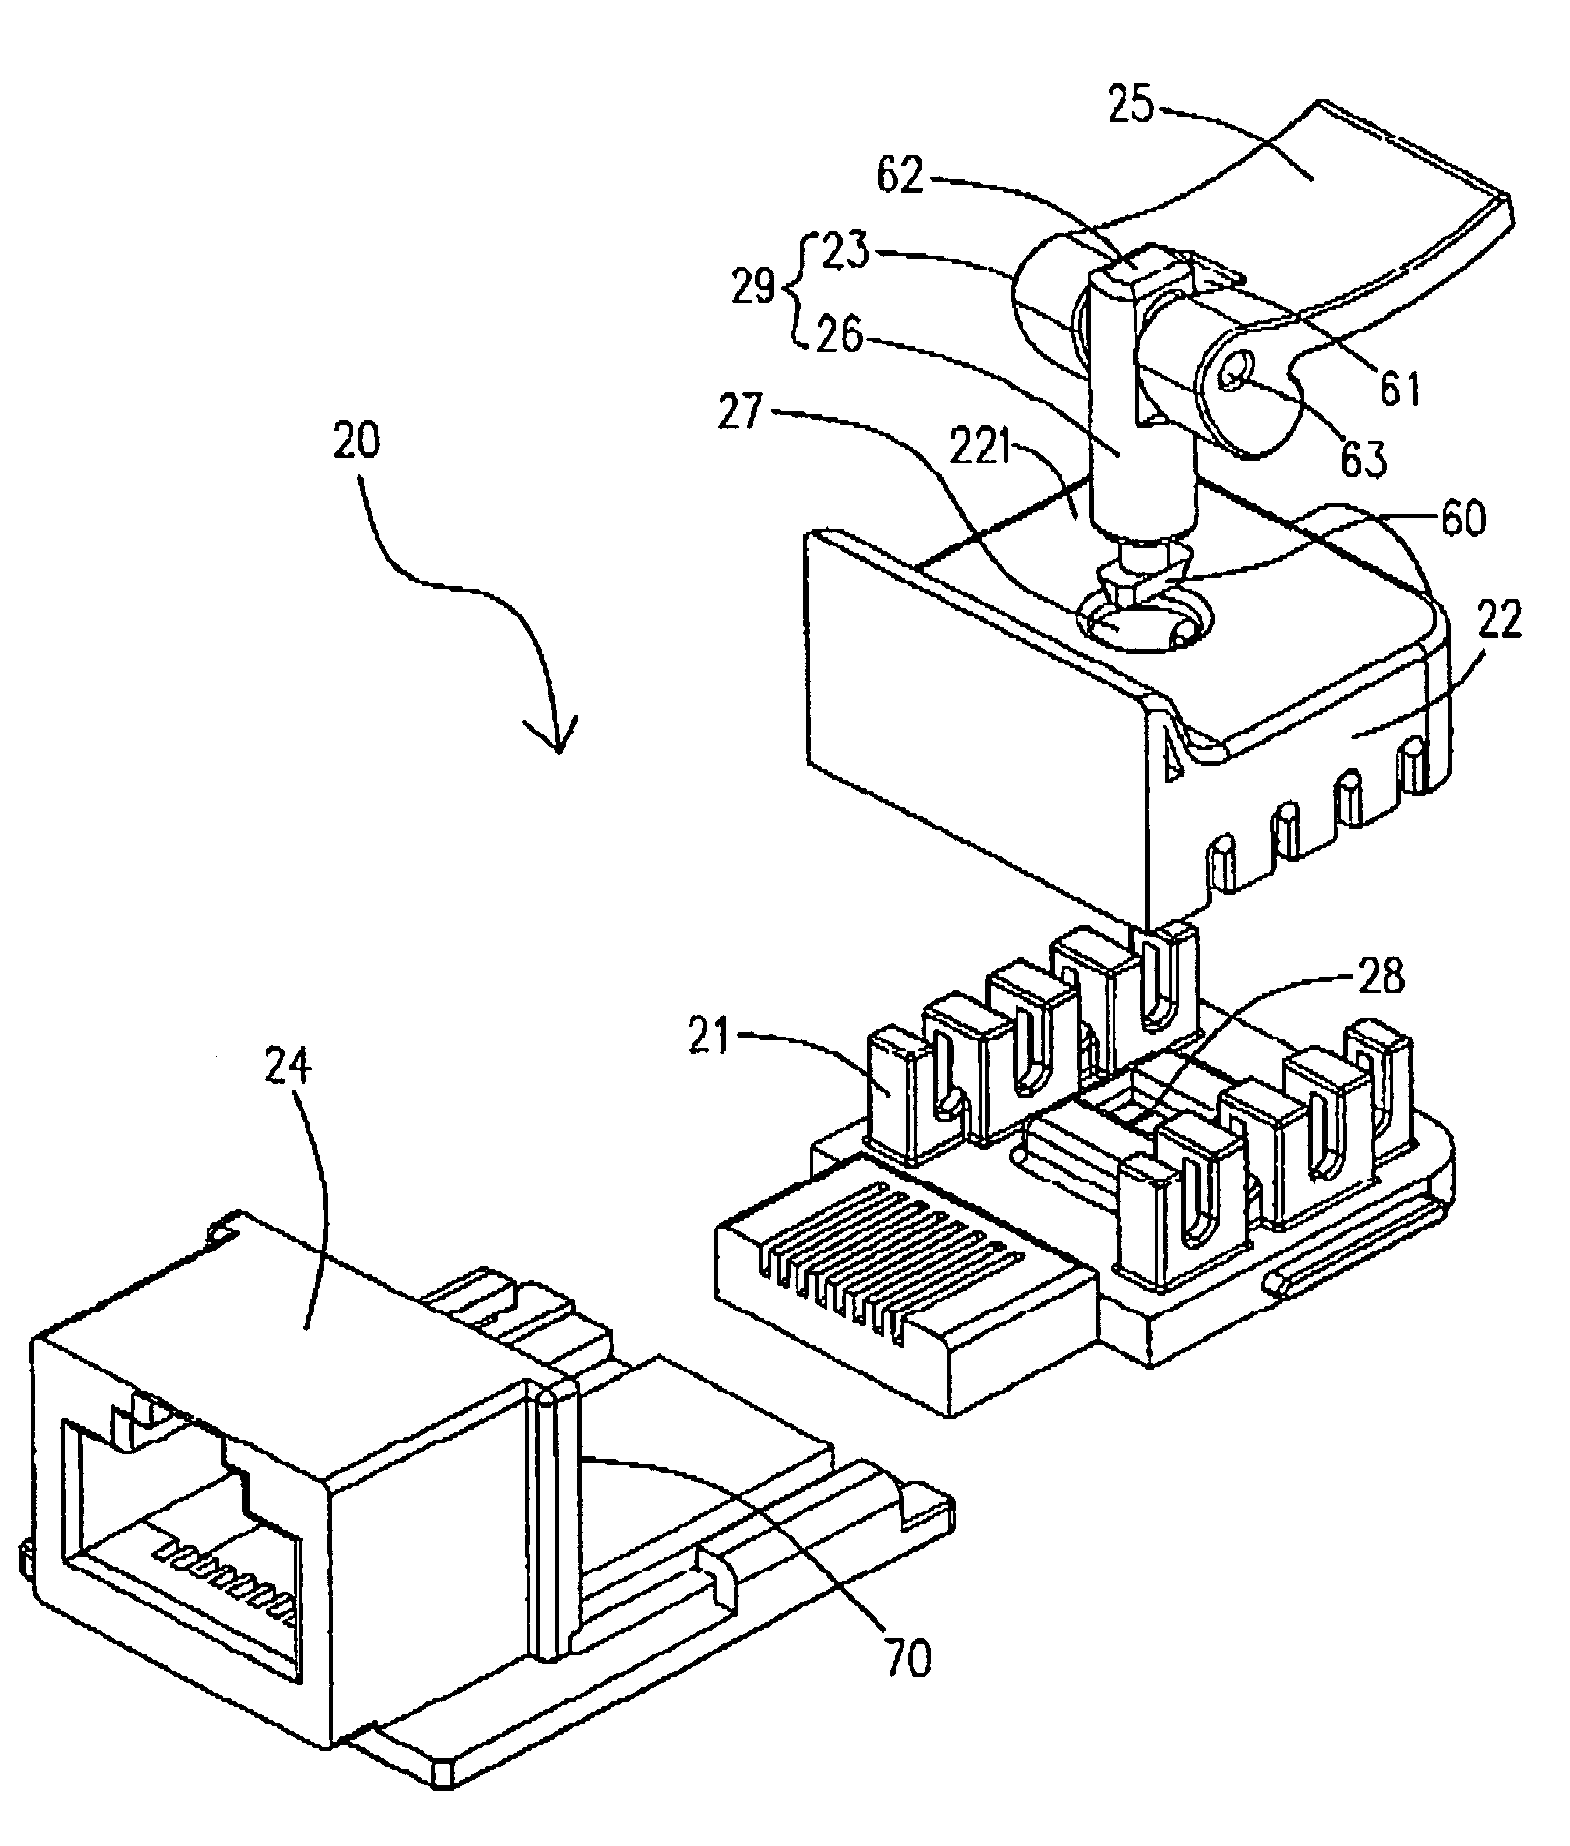 Structure and method for connecting conducting lines to terminals